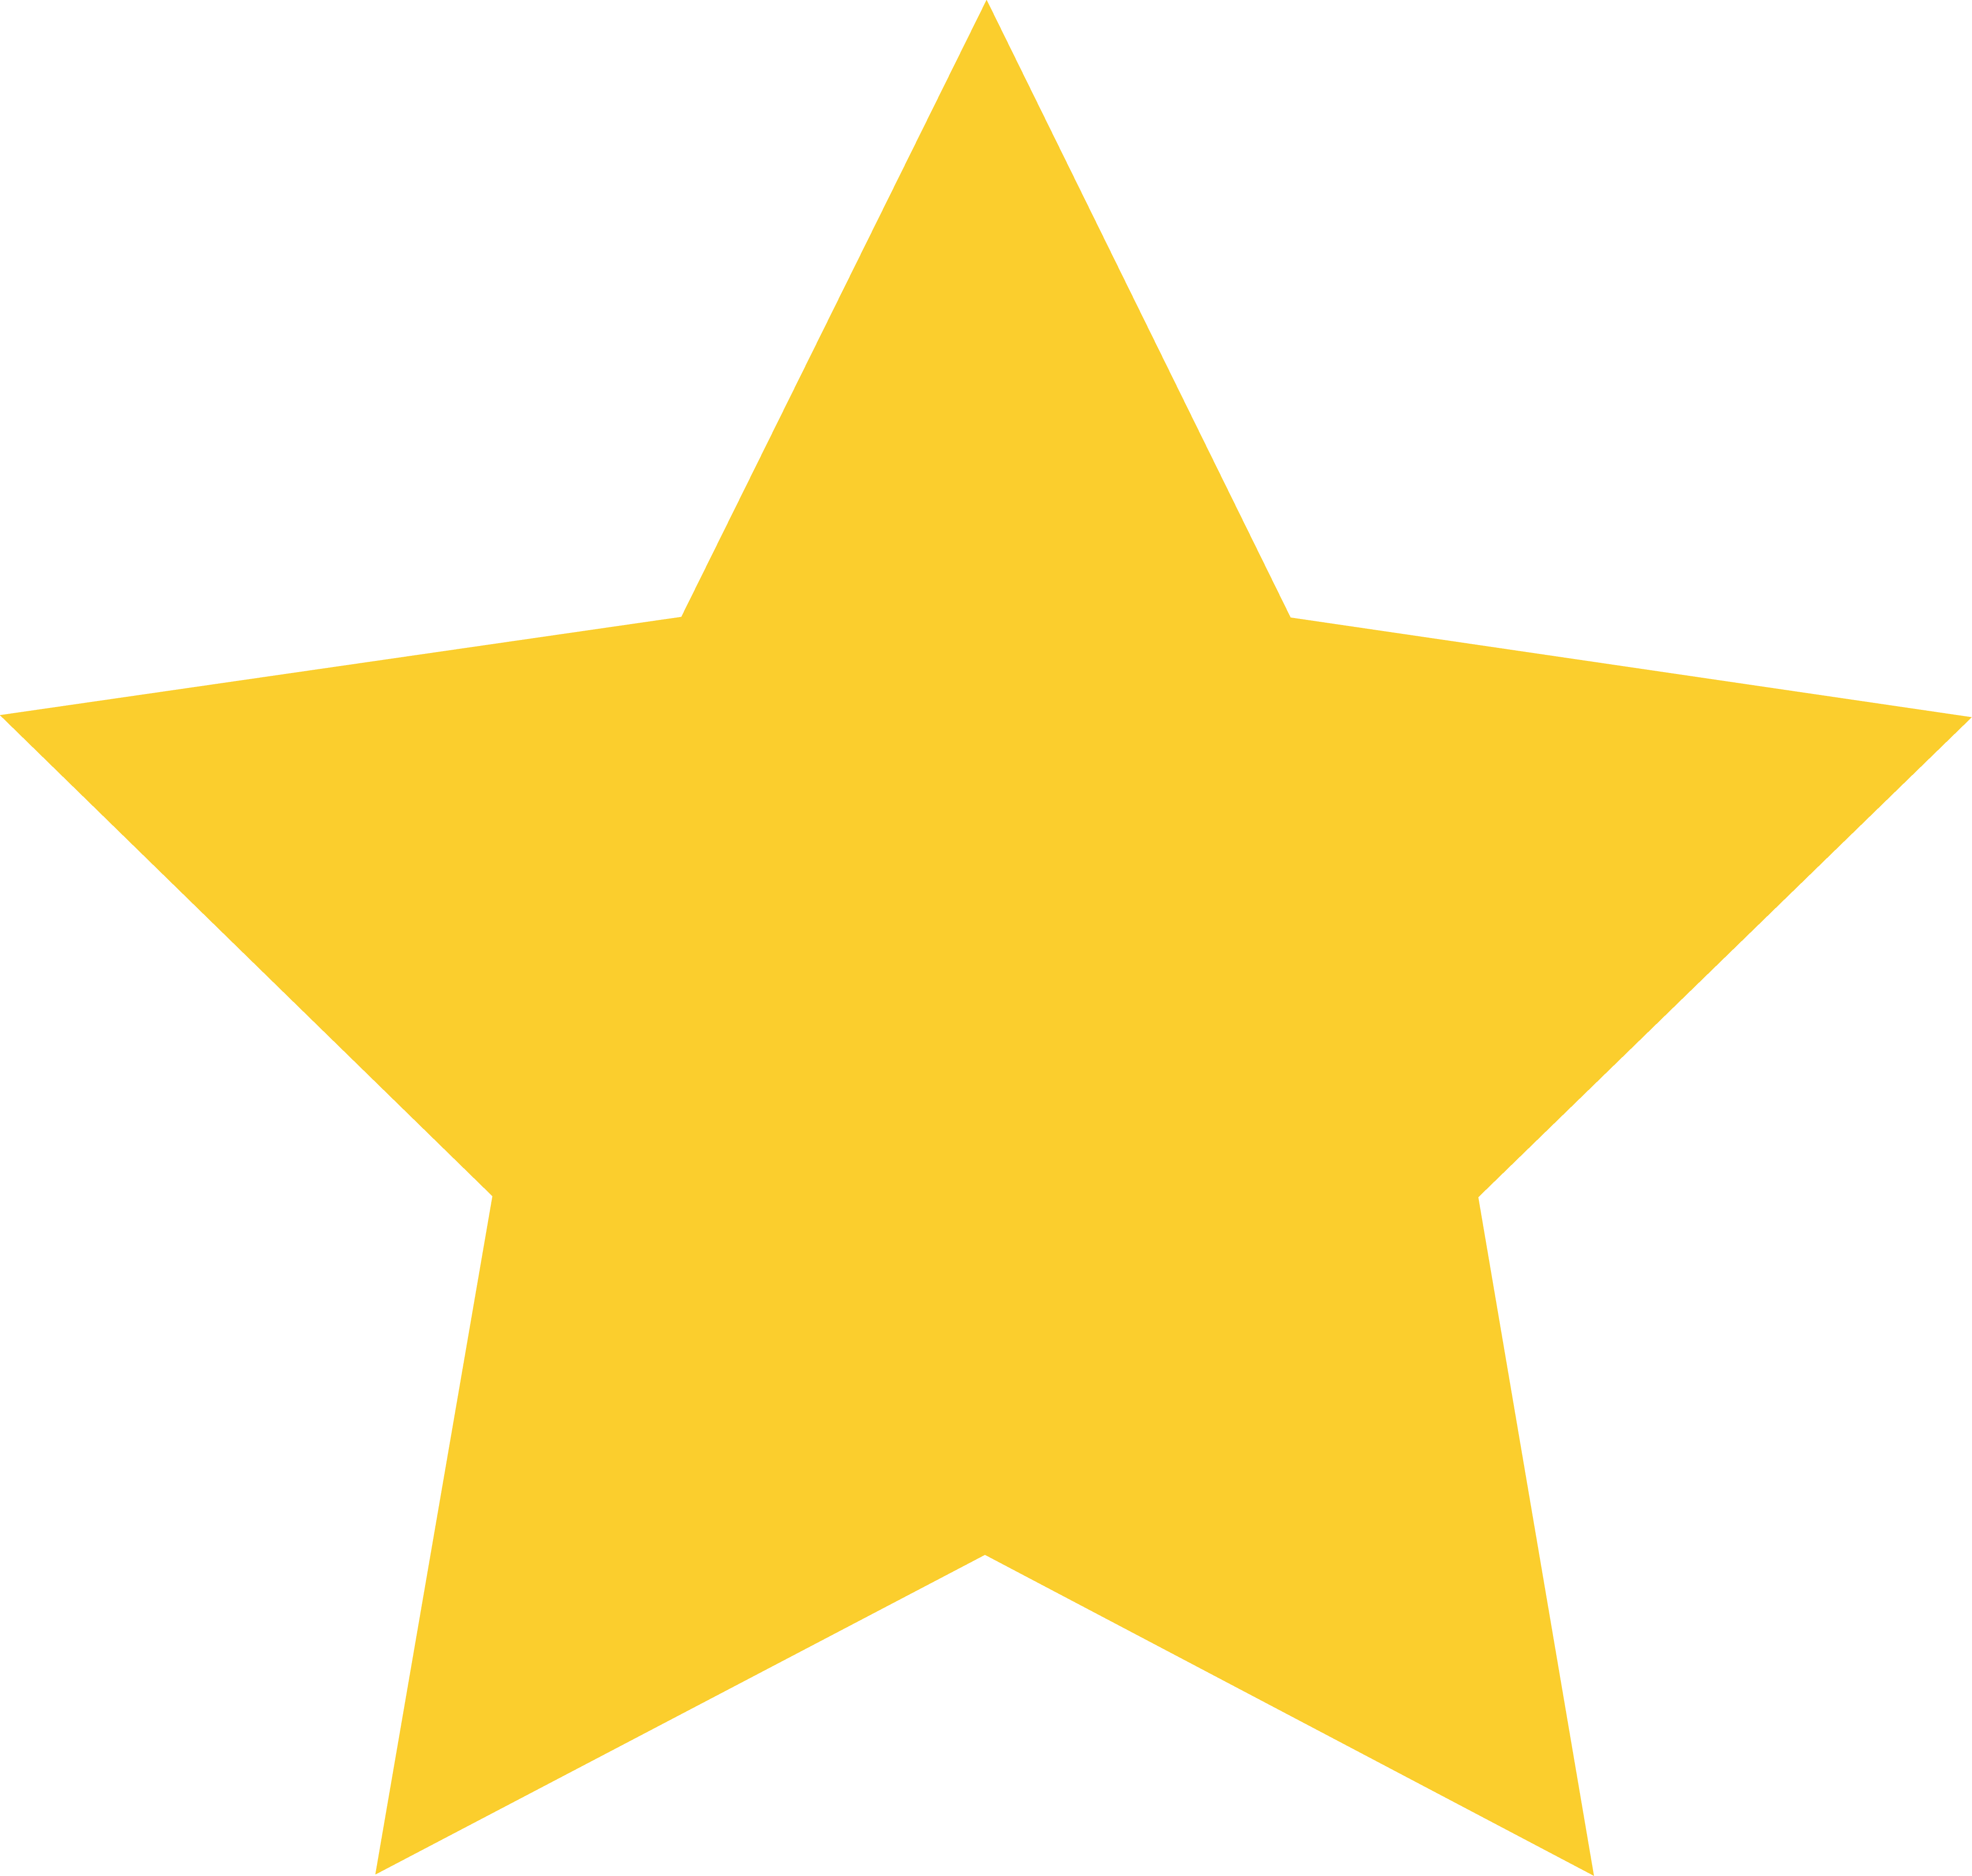 star_filled.png